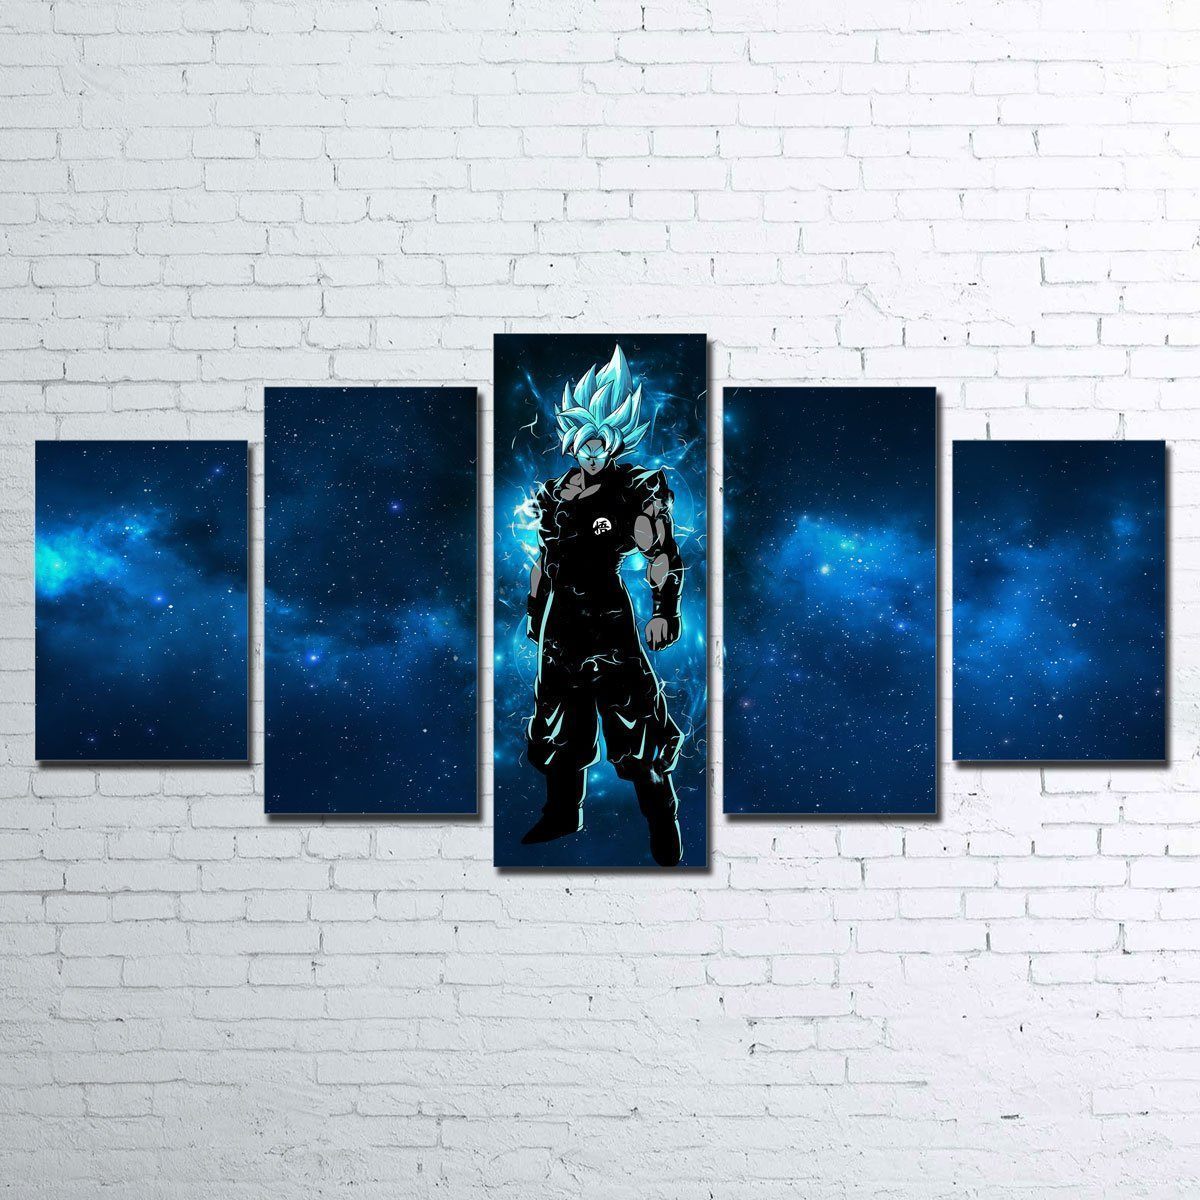 Dragon Ball Super Canvas Prints & Wall Art for Sale (Page #5 of 28